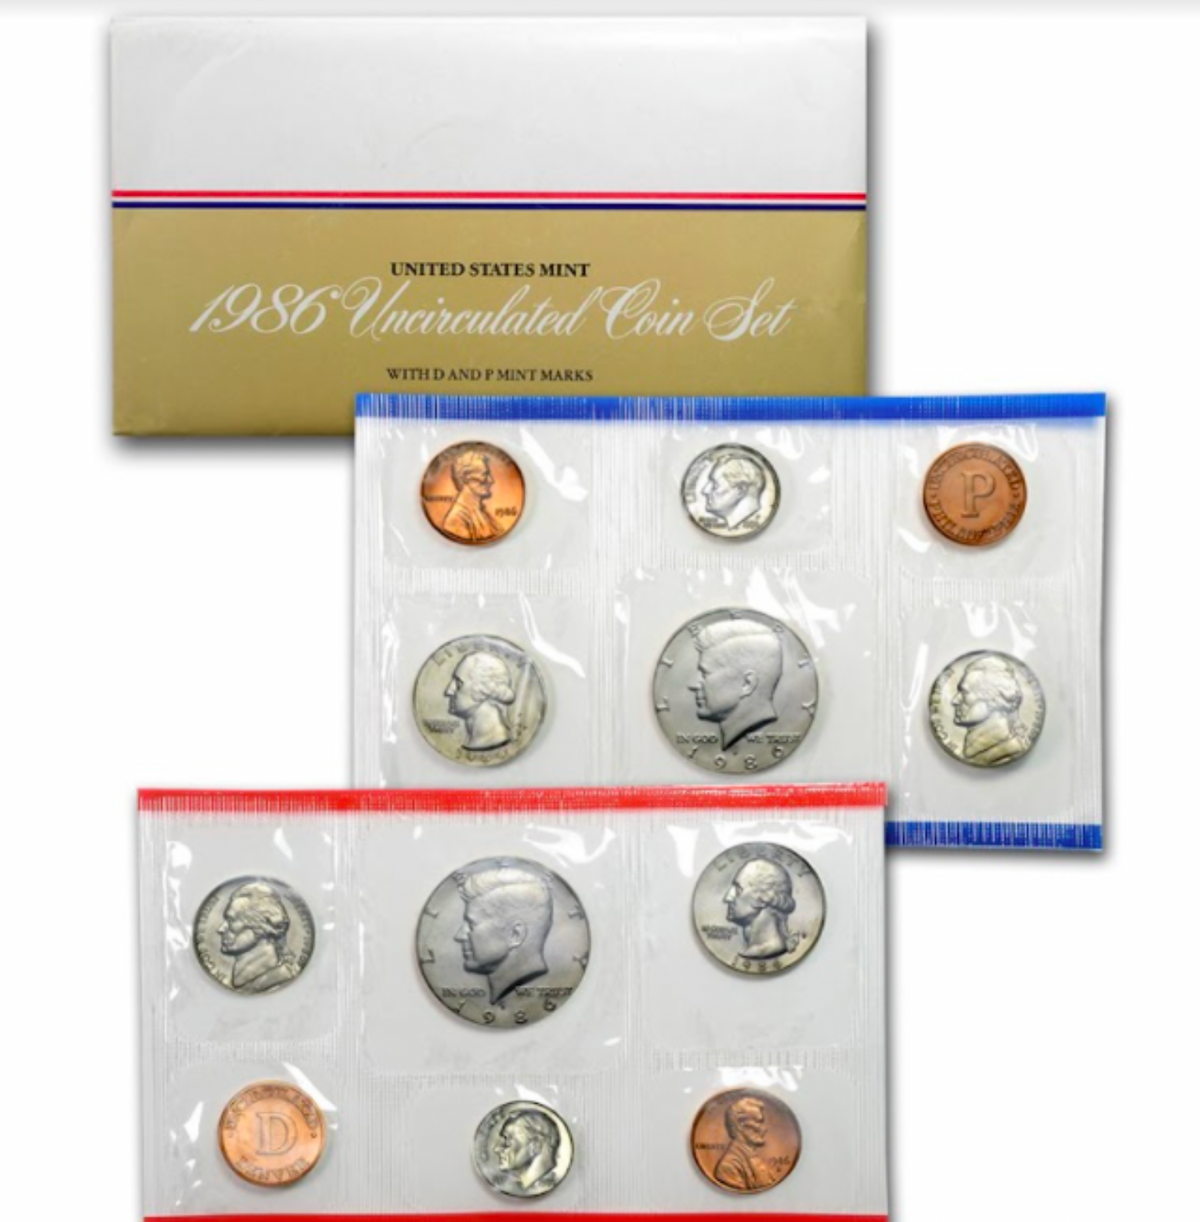 1986 United States Mint Uncirculated Coin Set.